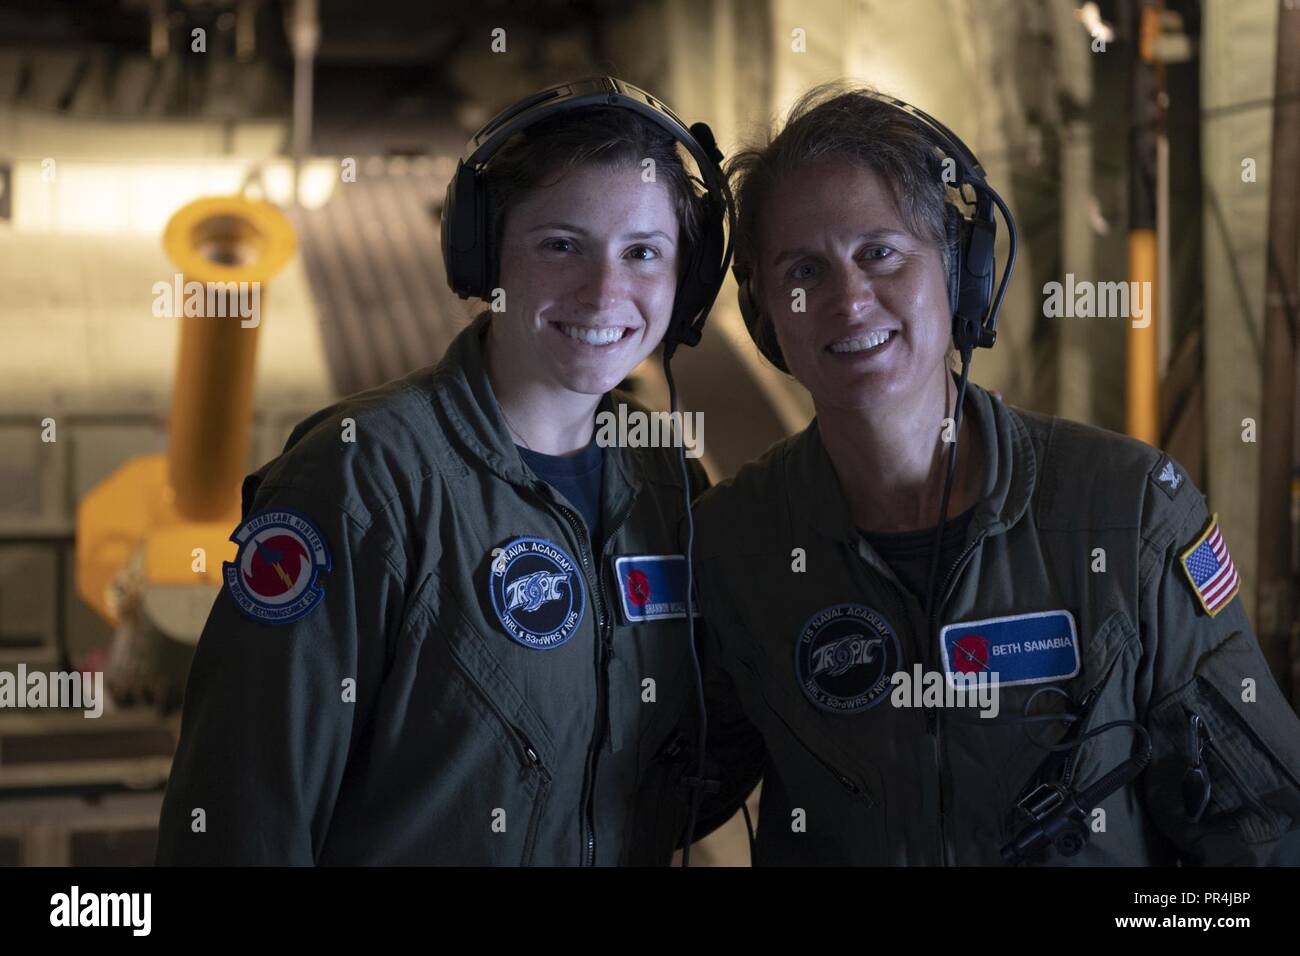 U.S. Navy Midshipman Shannon McAllister (left) and Captain Beth Sanabia are mission scientist's during a Hurricane Hunters mission that took off from the US Naval Academy   Savanah Air National Guard Base, Savanah, GA Airport, September 13, 2018. The U.S. Air Force Reserve 53rd Weather Reconnaissance Squadron, or Hurricane Hunters, is conducting a storm tasking mission into Hurricane Florence using a WC-130J Hercules, currently a category 2 storm. The flight tasking provides critical and timely weather data for the National Hurricane Center to assist in providing up-to-date and accurate inform Stock Photo